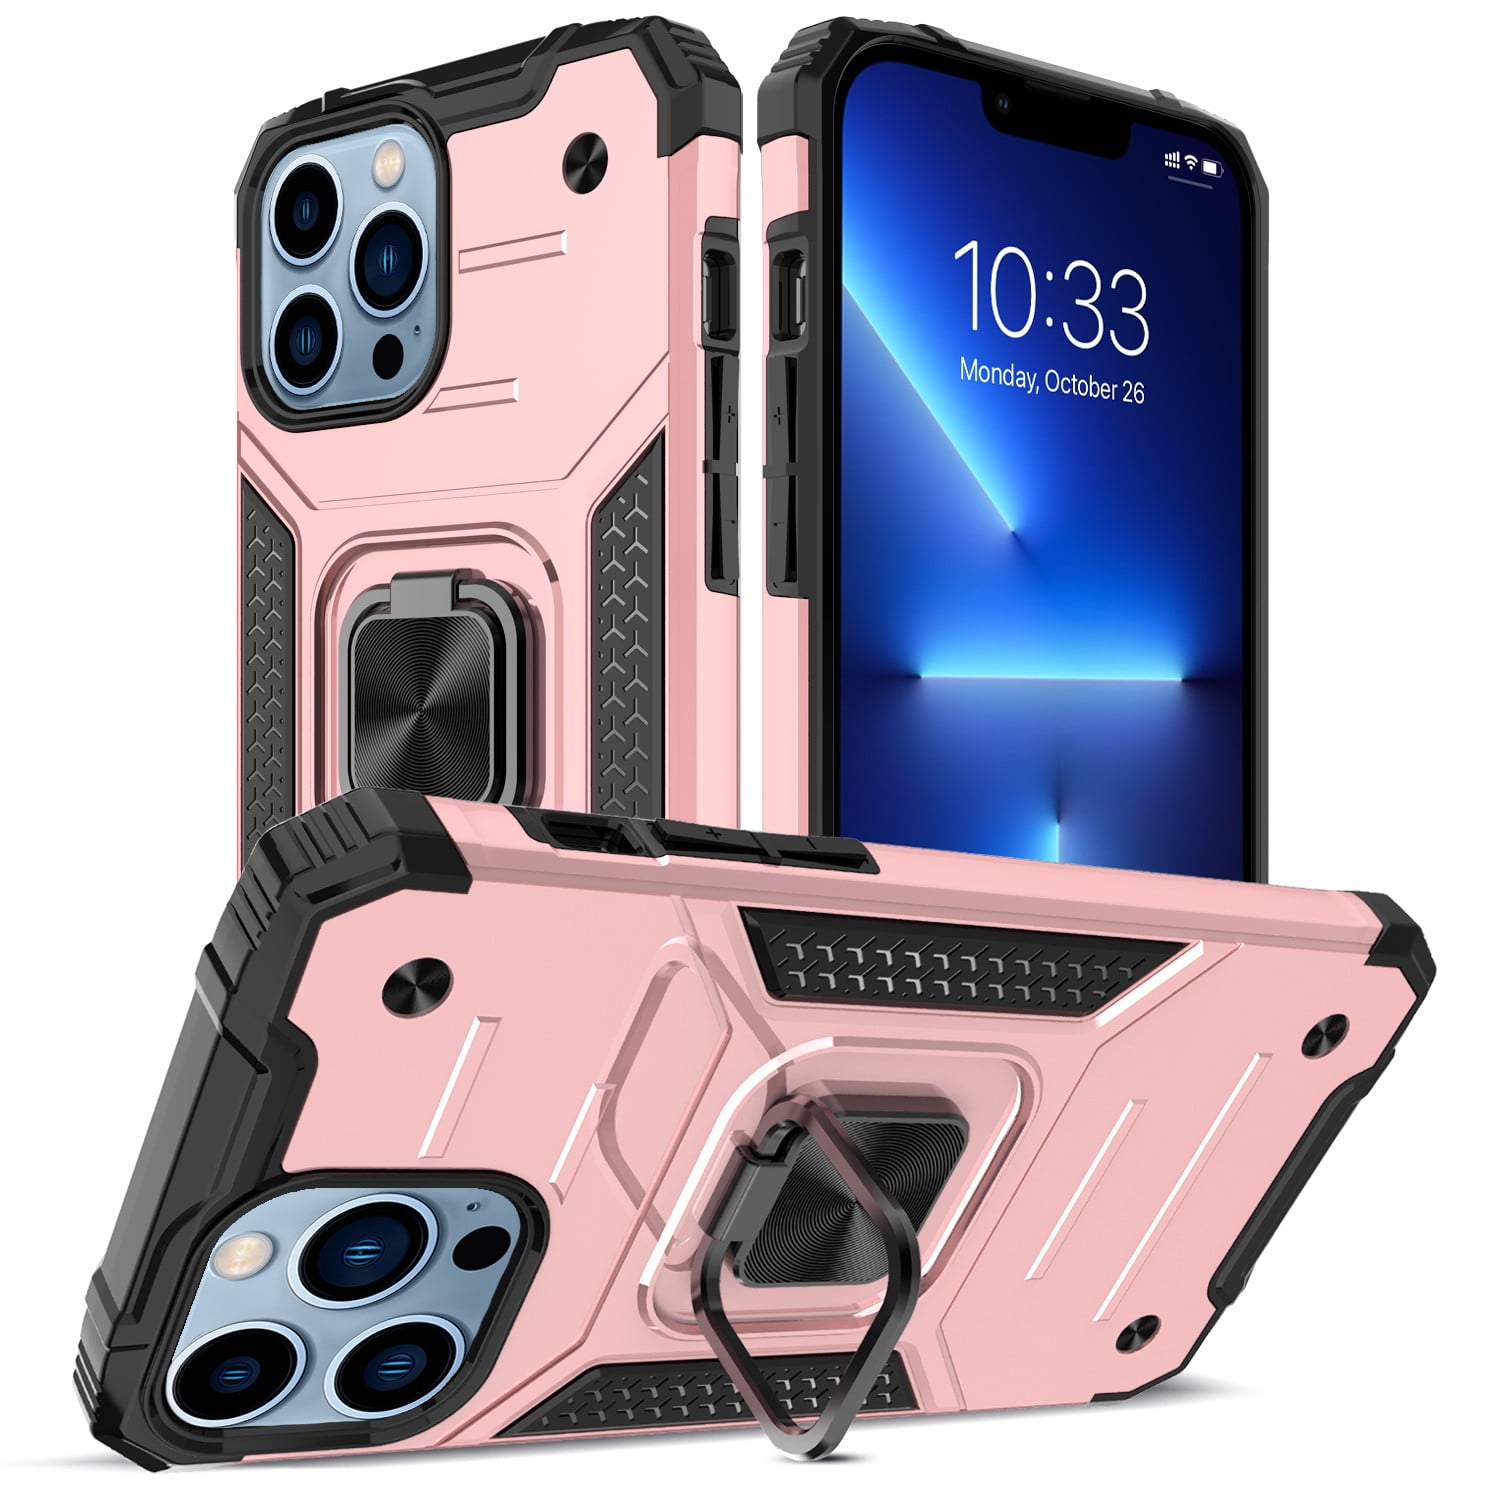 Ring Design Rose Gold Necessary for New Mobile Phones Applicable to iPhone12mini Mobile Phone case Military-Grade Drop Protection Suitable for Magnetic car Mount 